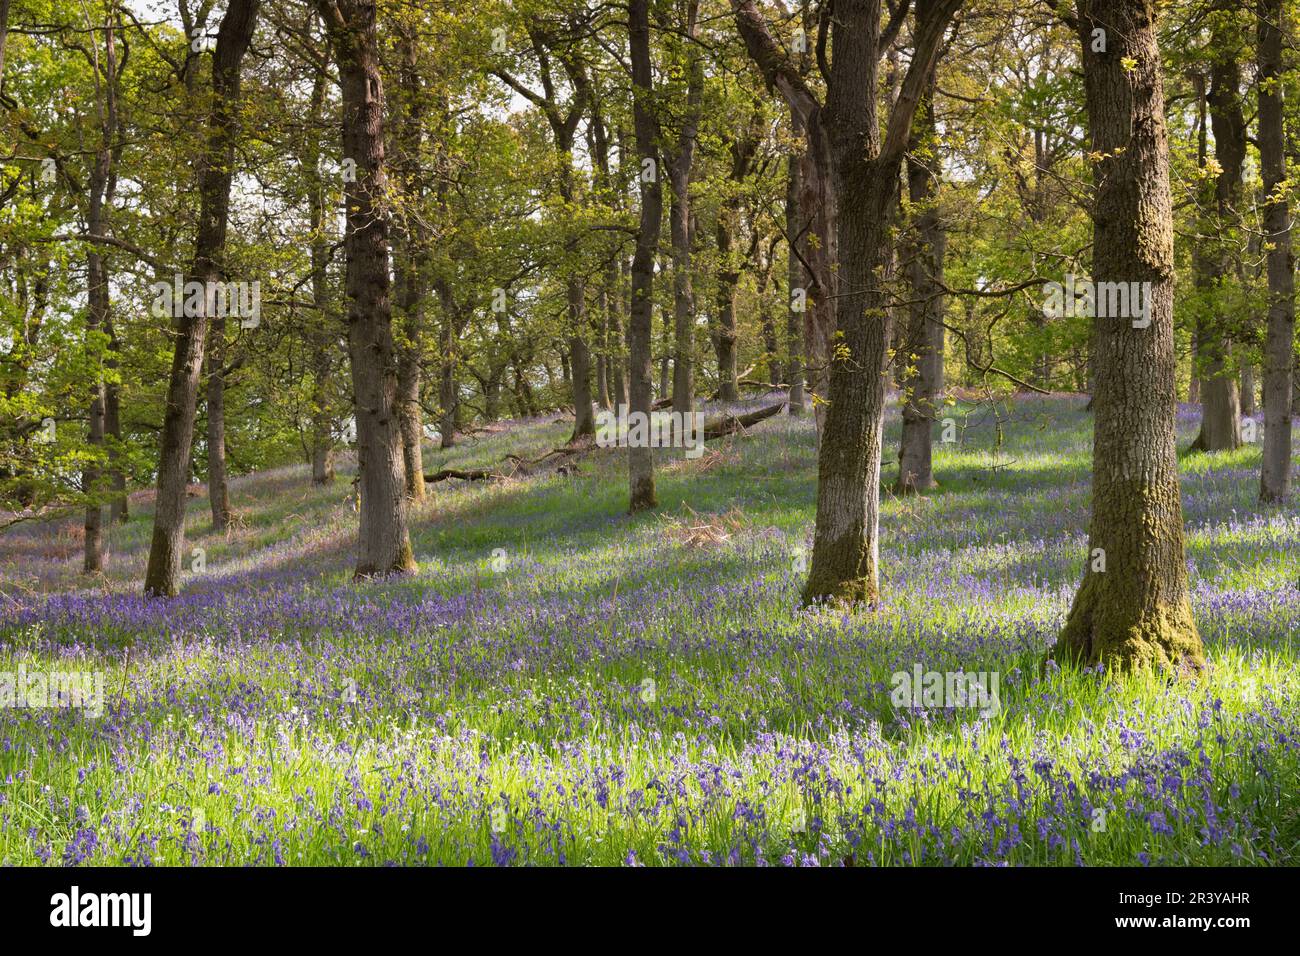 Native Bluebells (Hyacinthoides Non-scripta) in Flower Beneath Oak Trees in the Ancient Woodland at Kinclaven, Formerly Known as Ballathie Wood Stock Photo